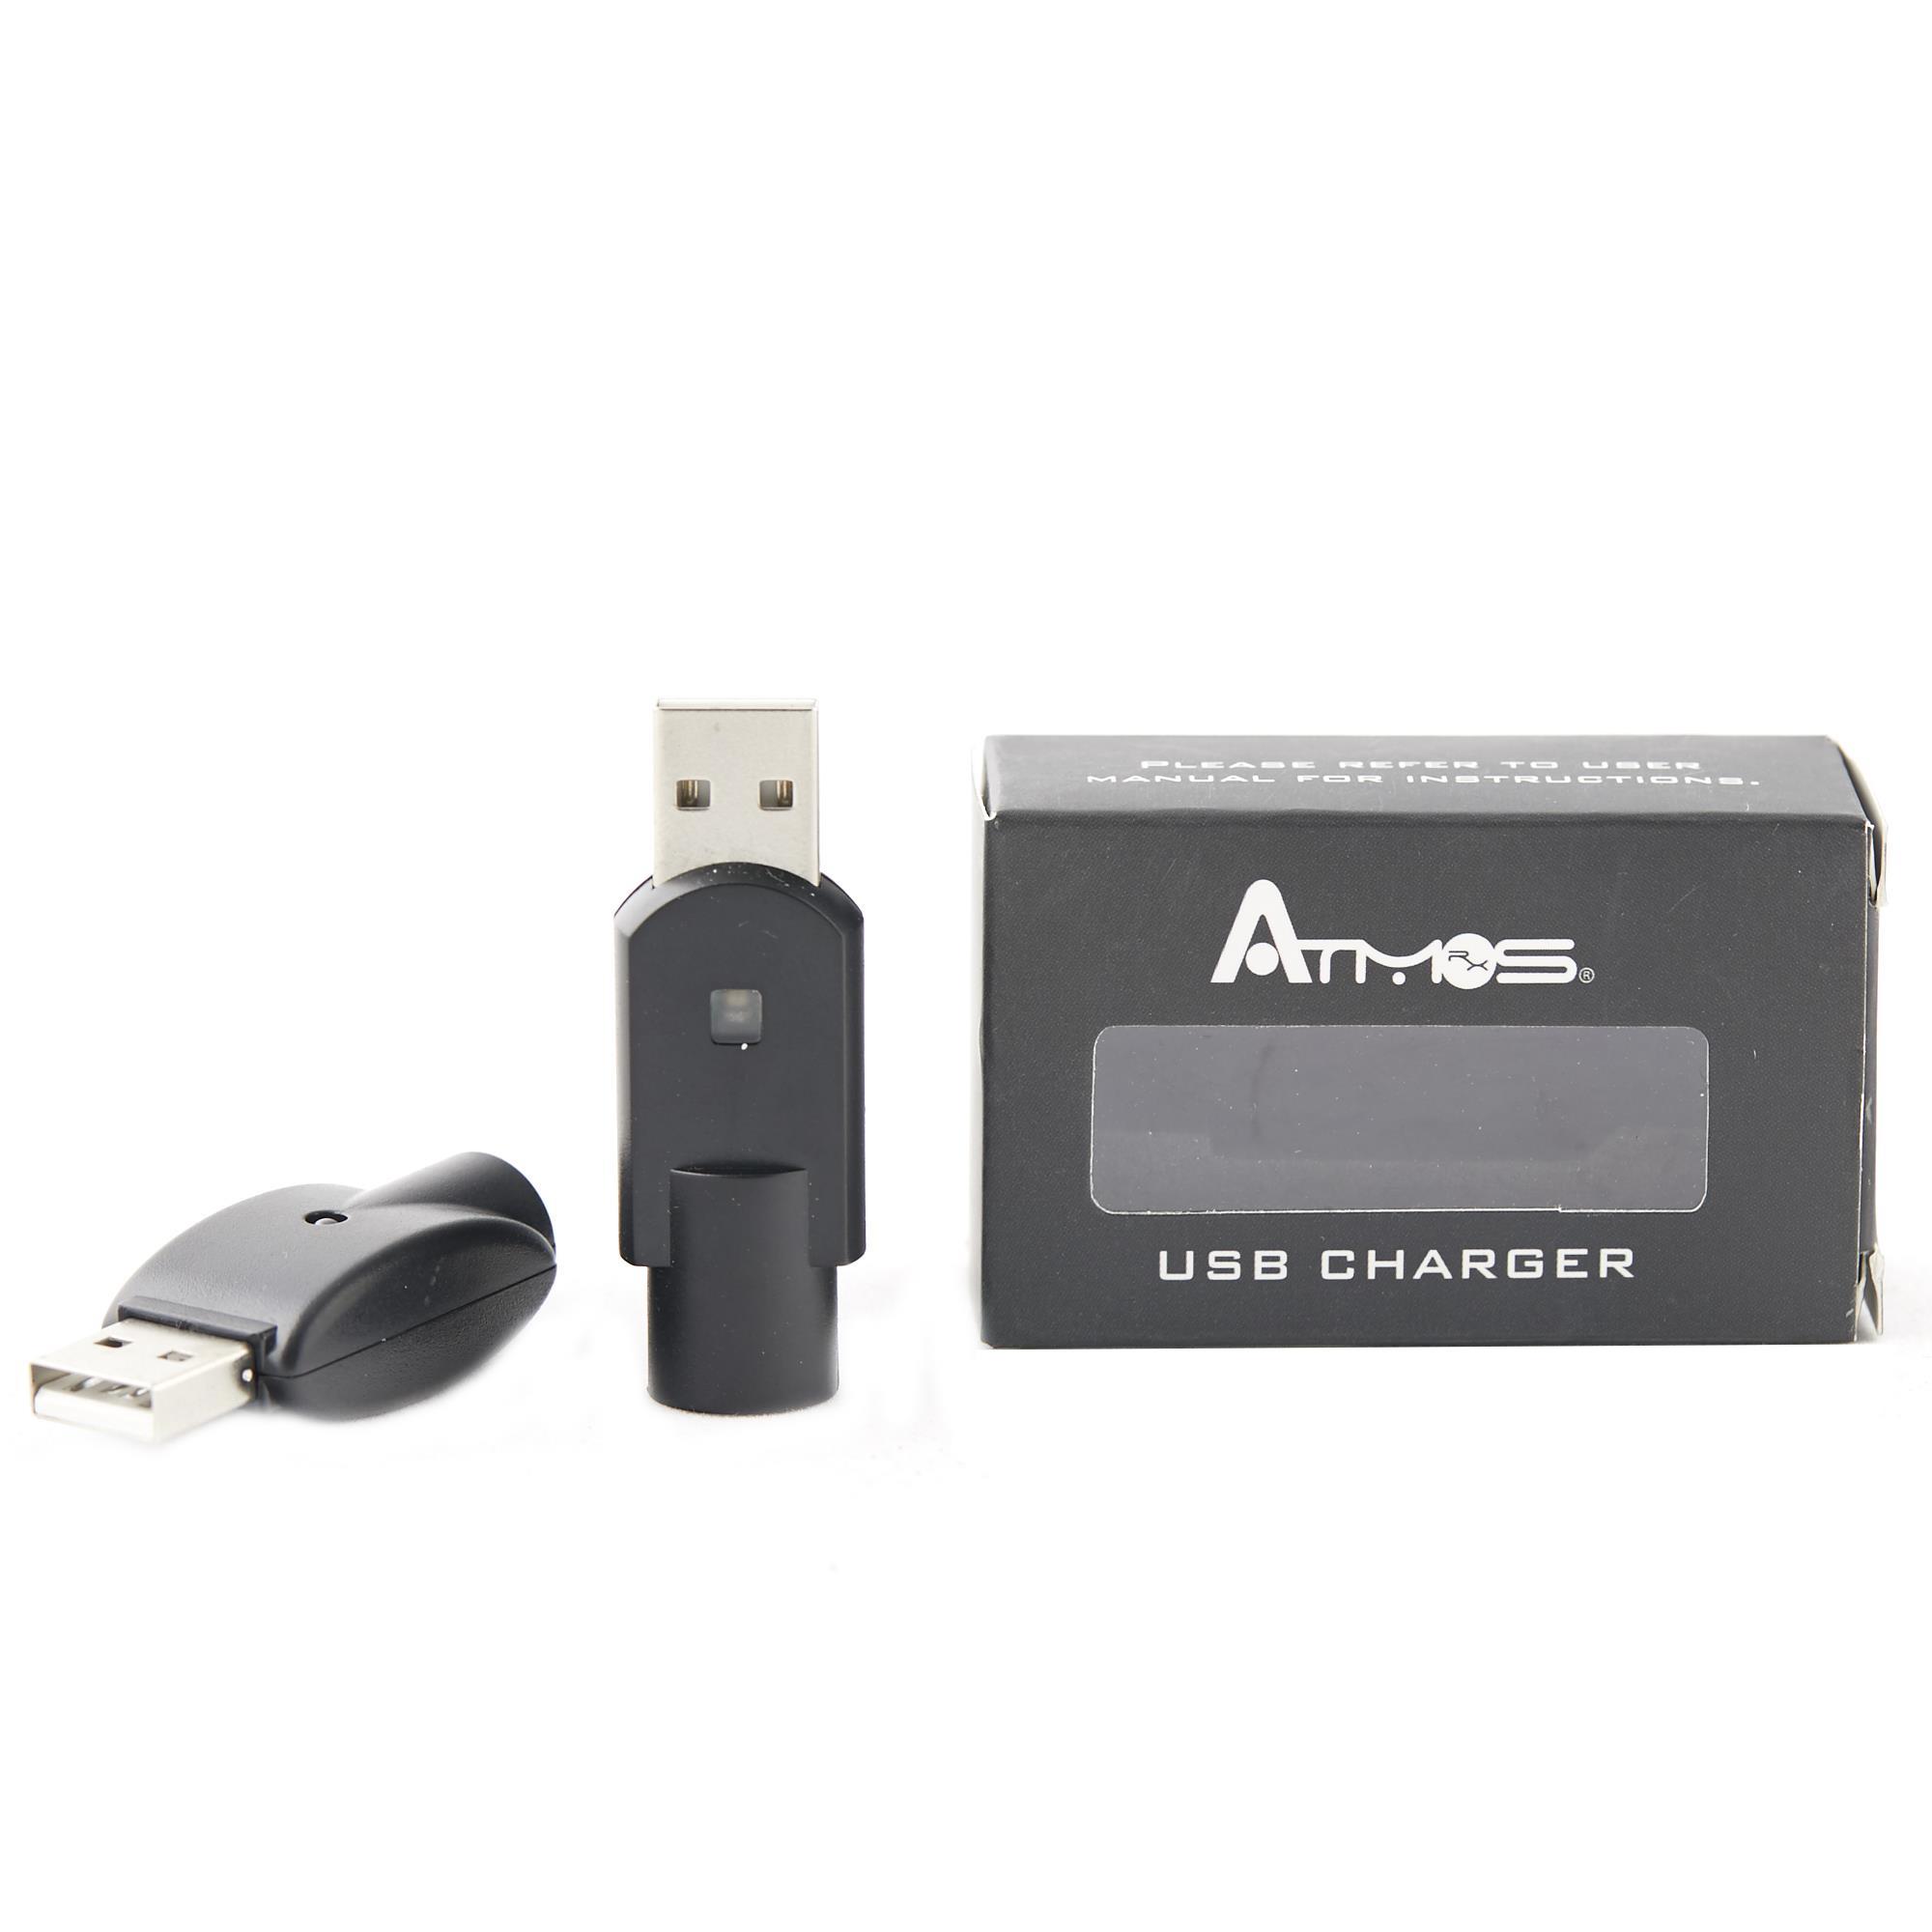 ATMOS CORDLESS USB CHARGER